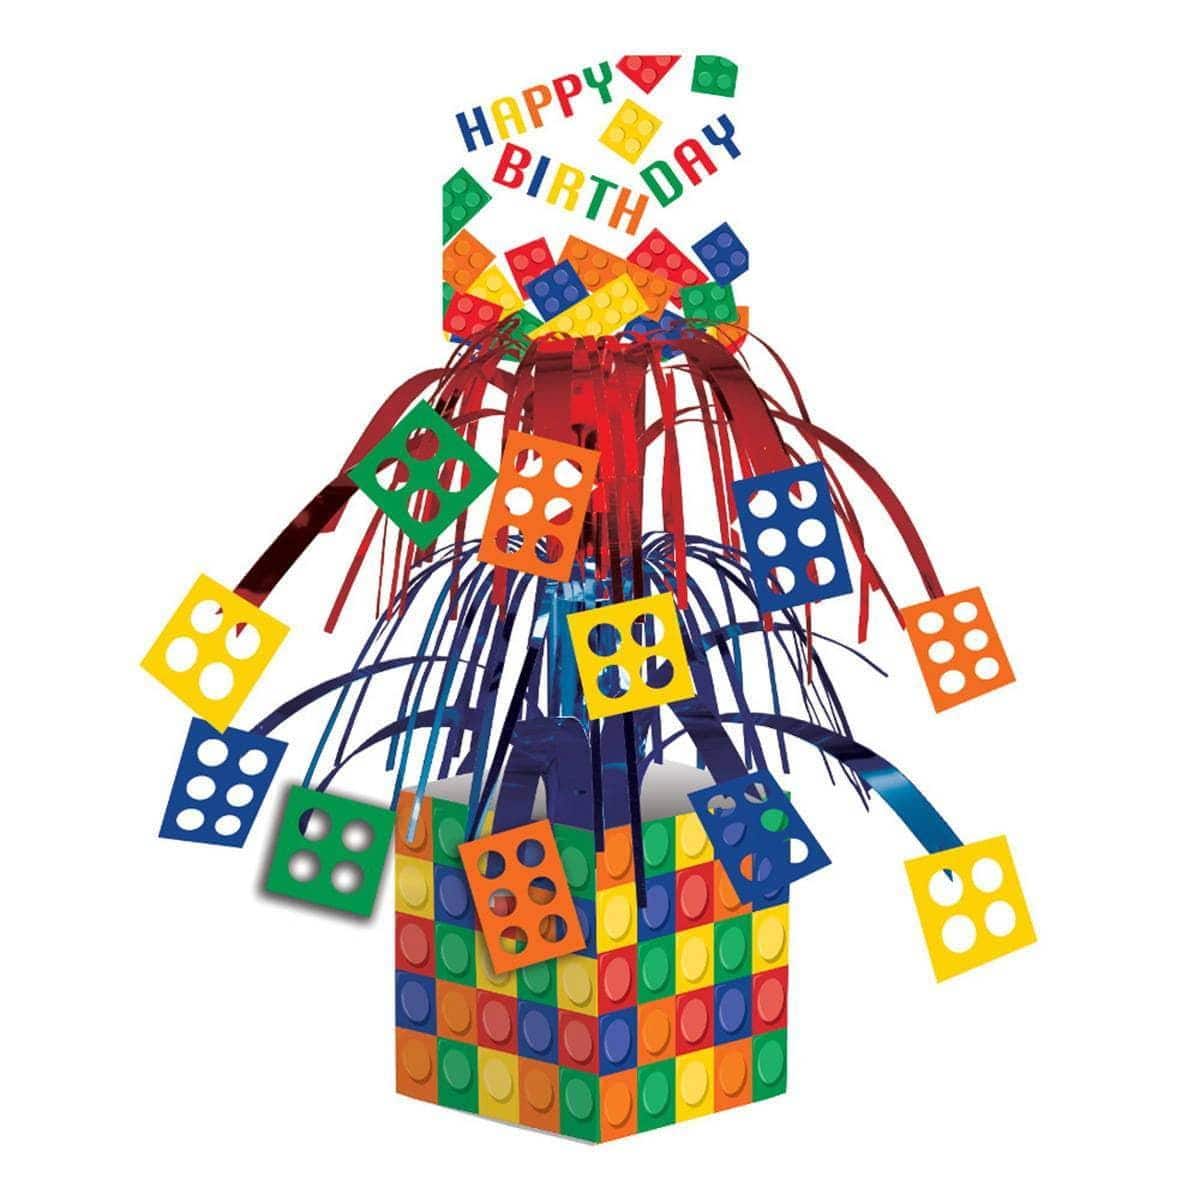 Buy Kids Birthday Block Party cascade centerpiece sold at Party Expert